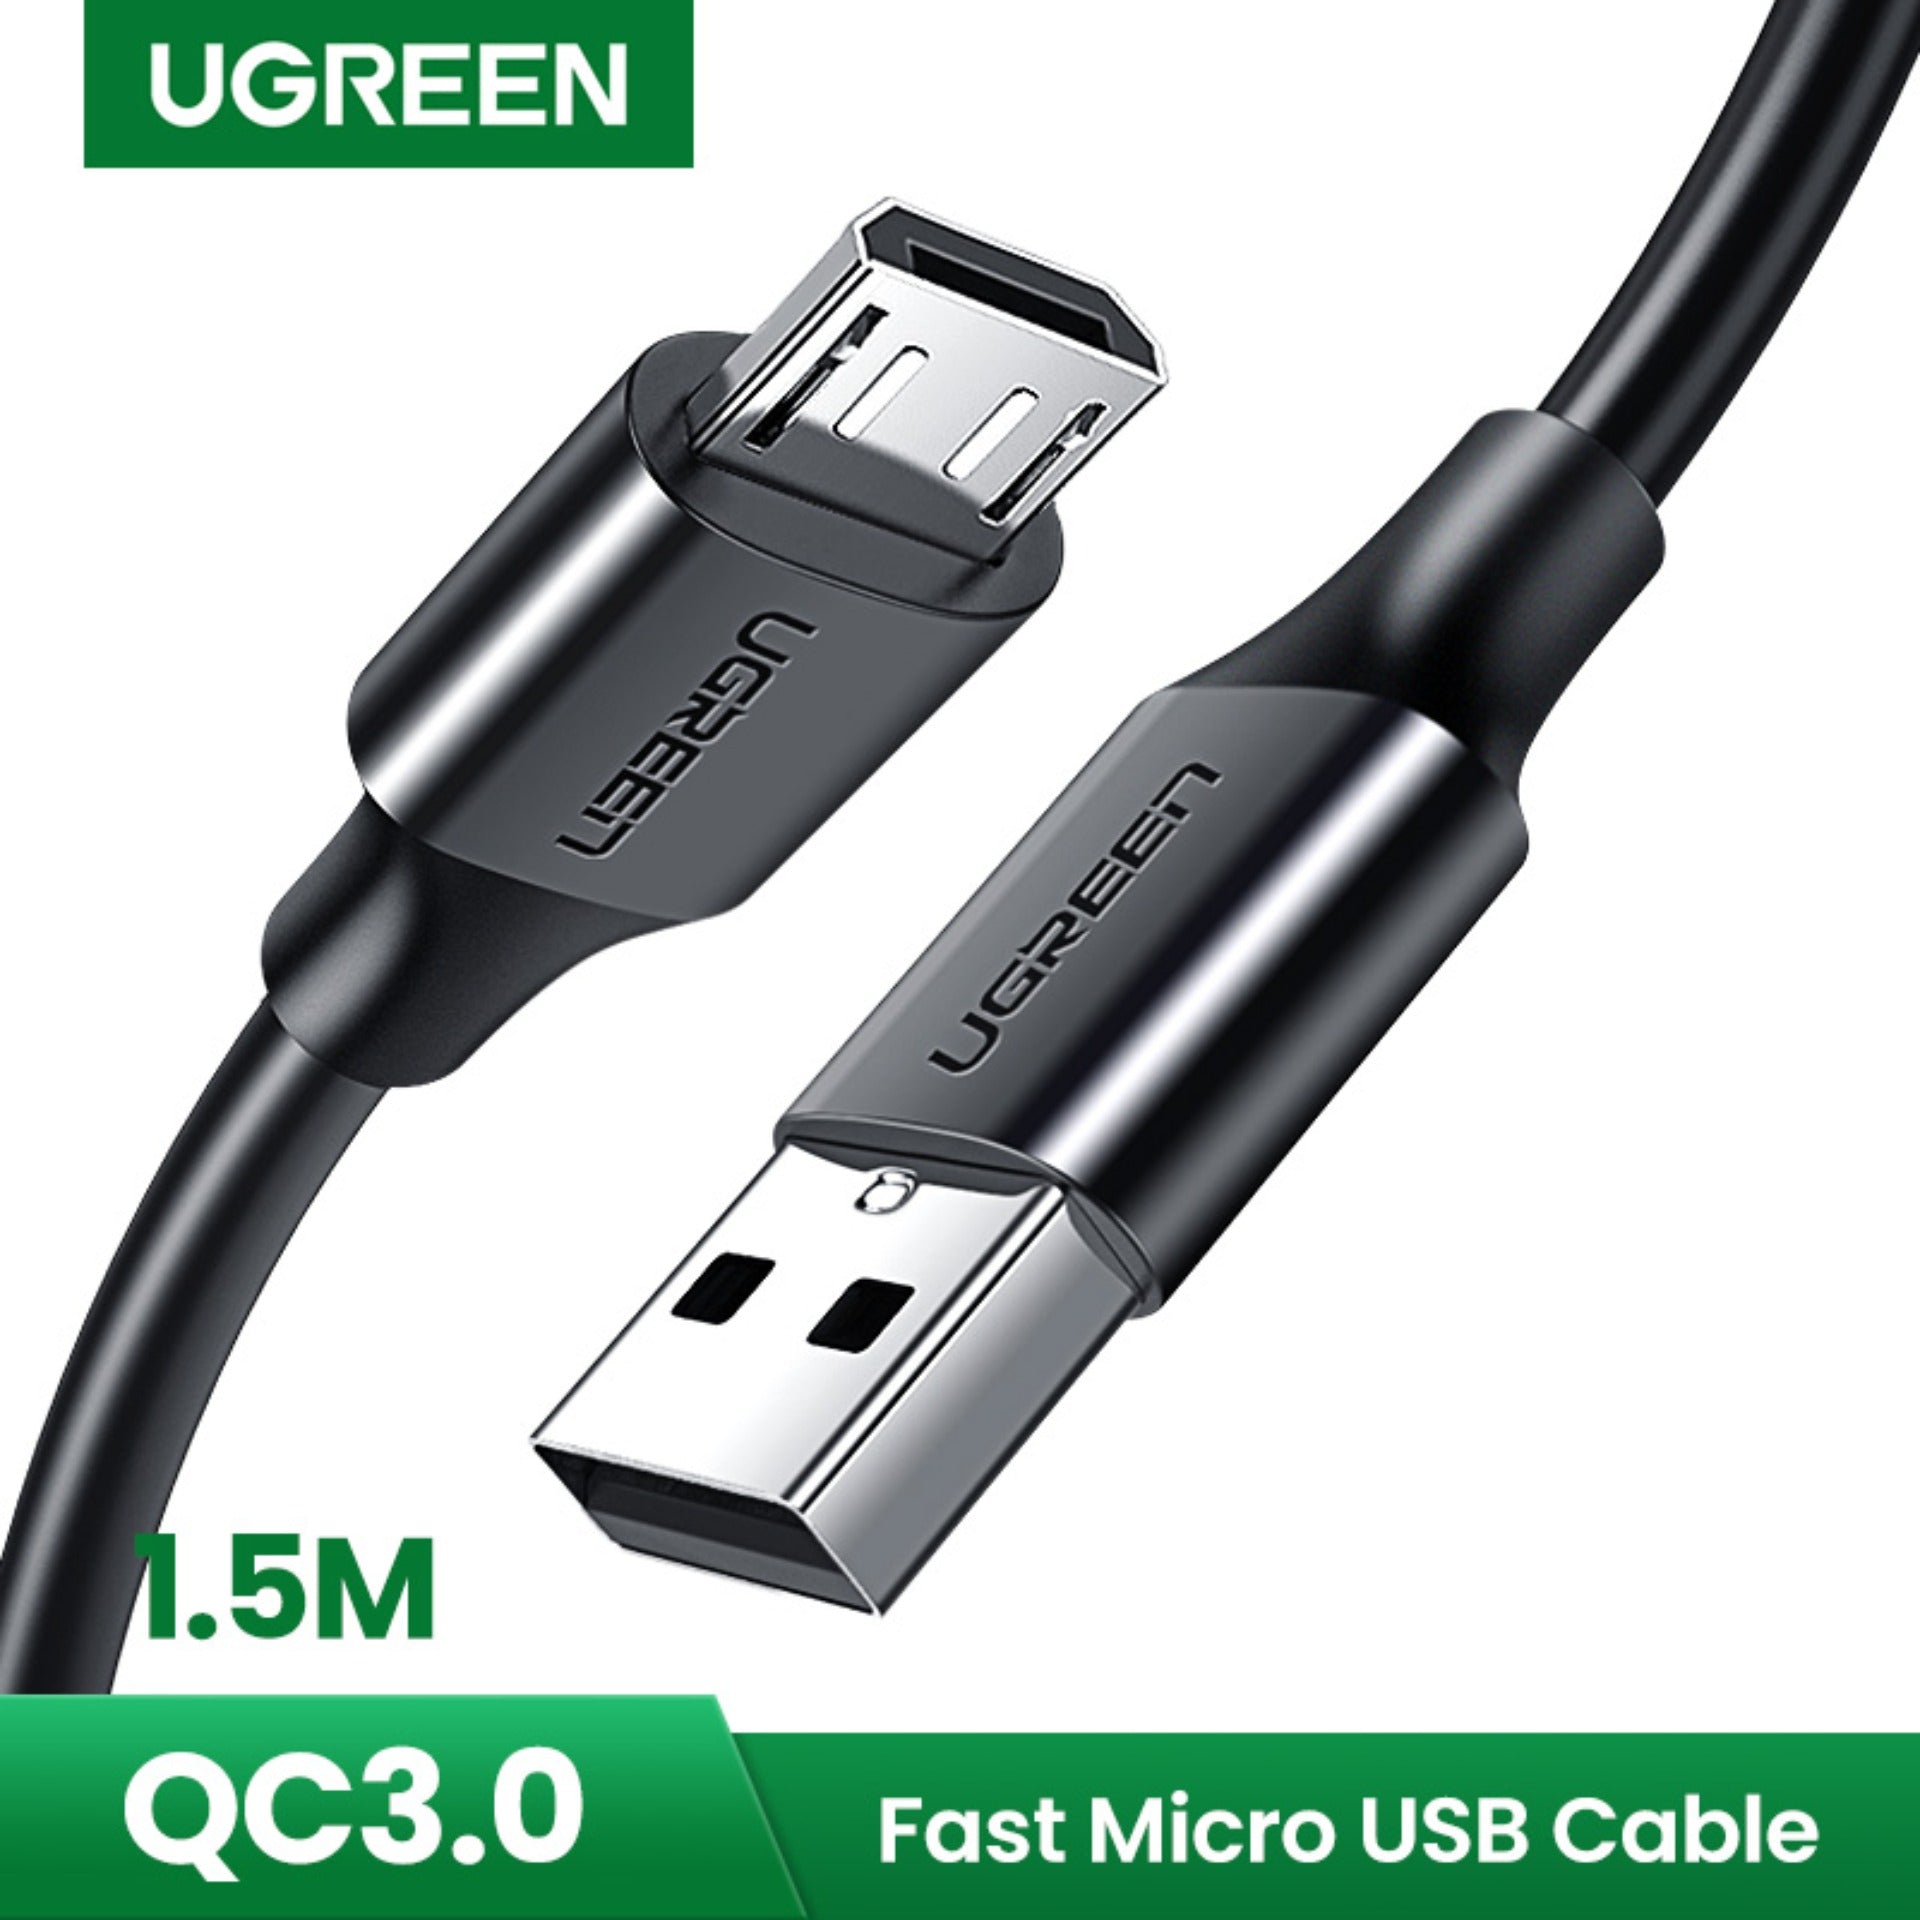 UGREEN USB 2.0A TO MICRO USB CABLE  NICKEL PLATING 1.5M - Black